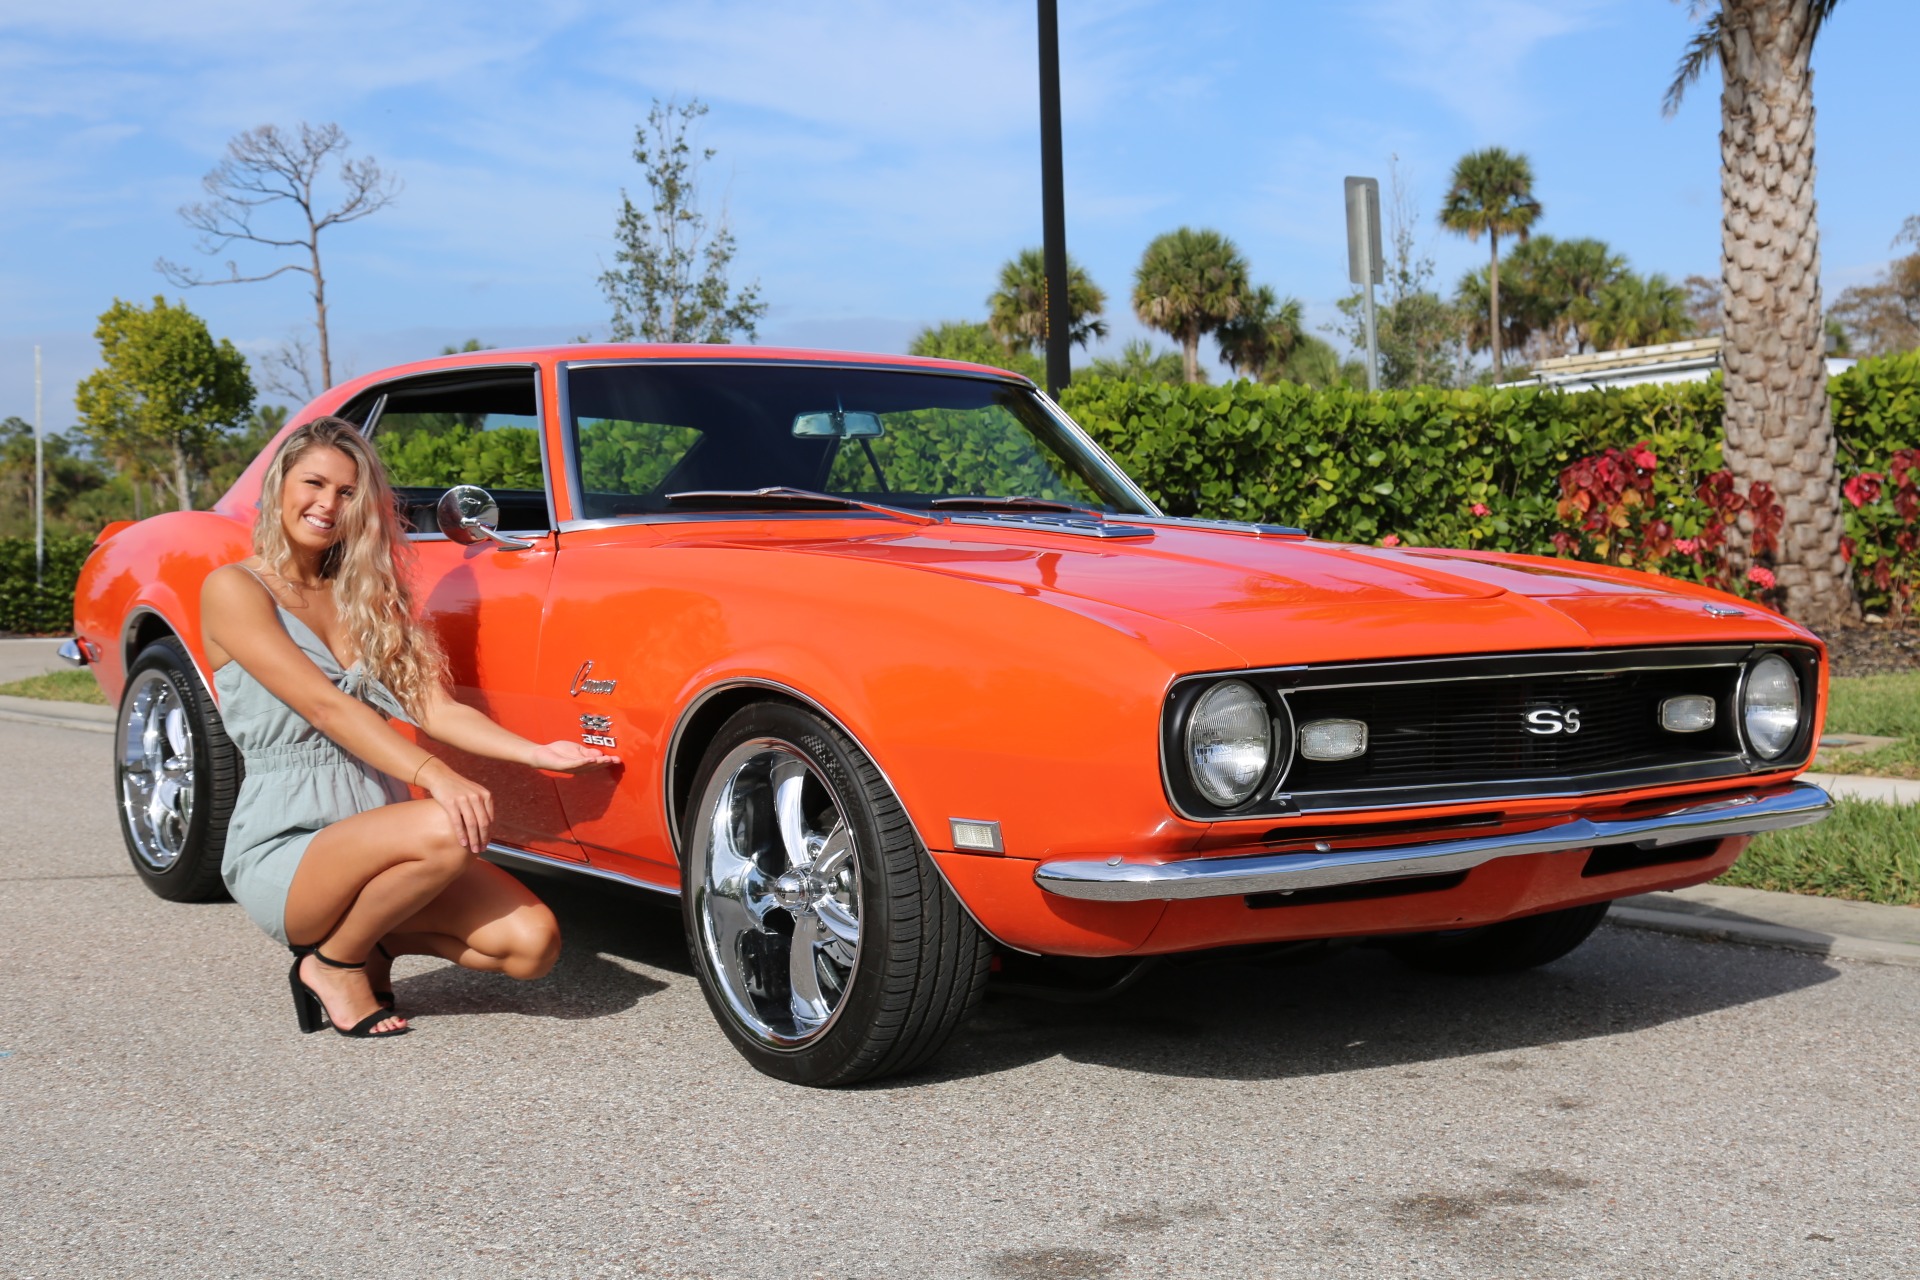 Used 1968 Chevy Camaro V8 4 Speed Manual for sale Sold at Muscle Cars for Sale Inc. in Fort Myers FL 33912 1